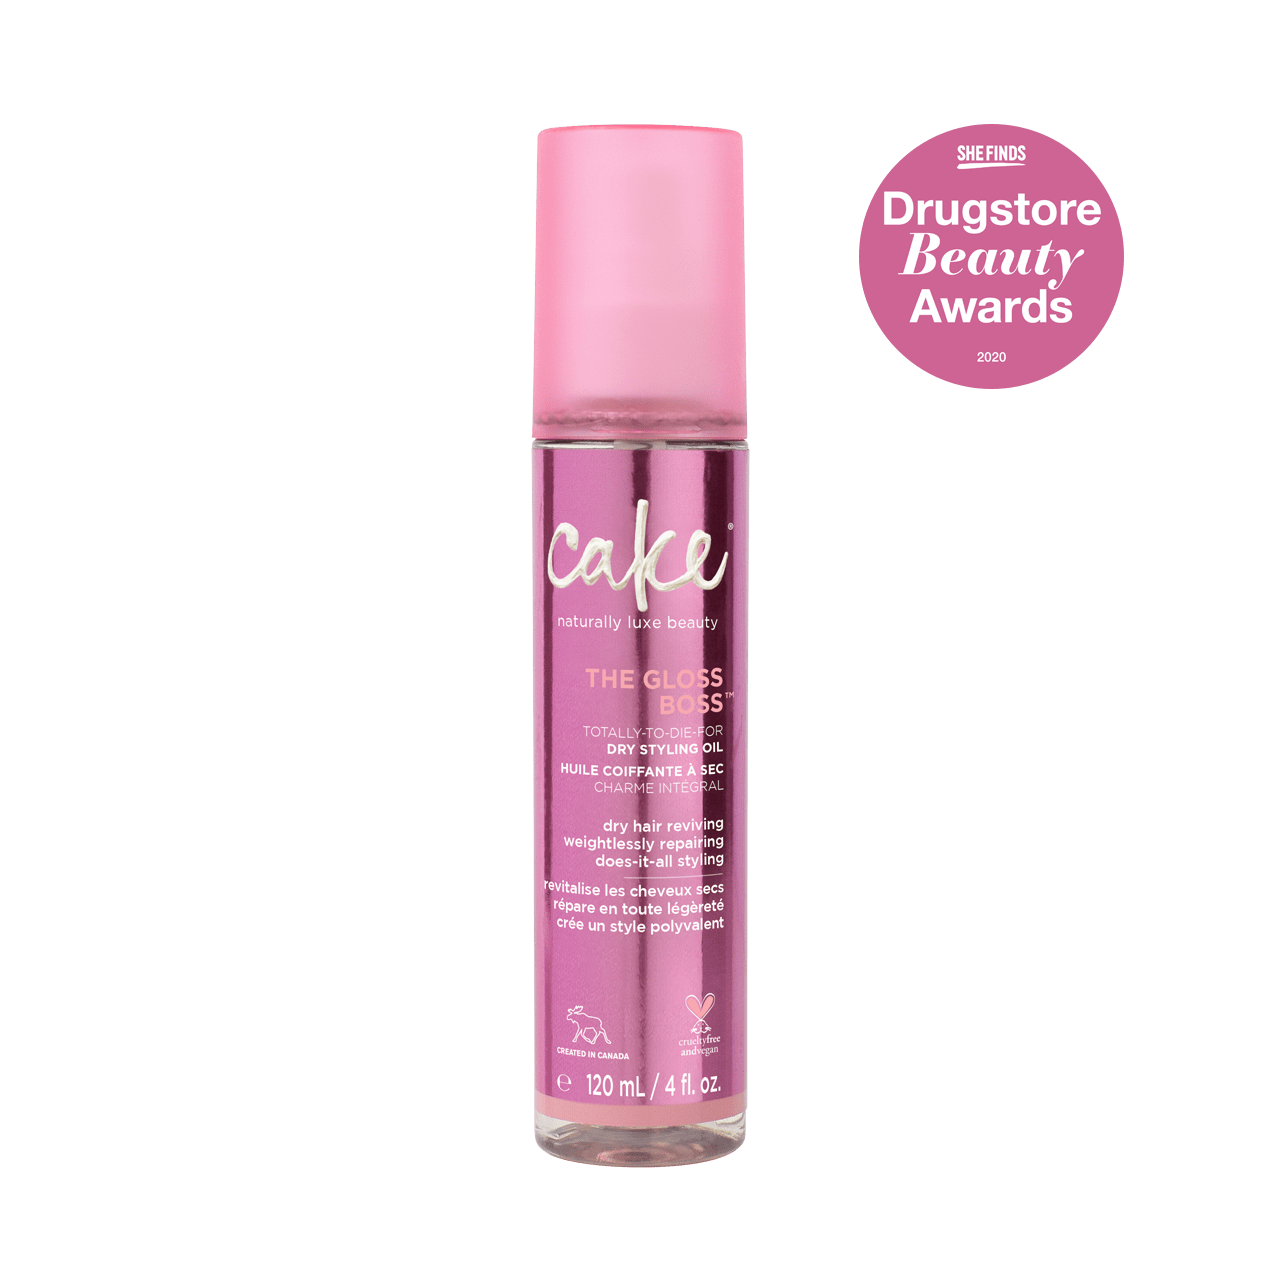 CAKE BEAUTY VEGAN AND CRUELTY-FREE HAIR CARE REVIEW – Fresh Beauty Fix